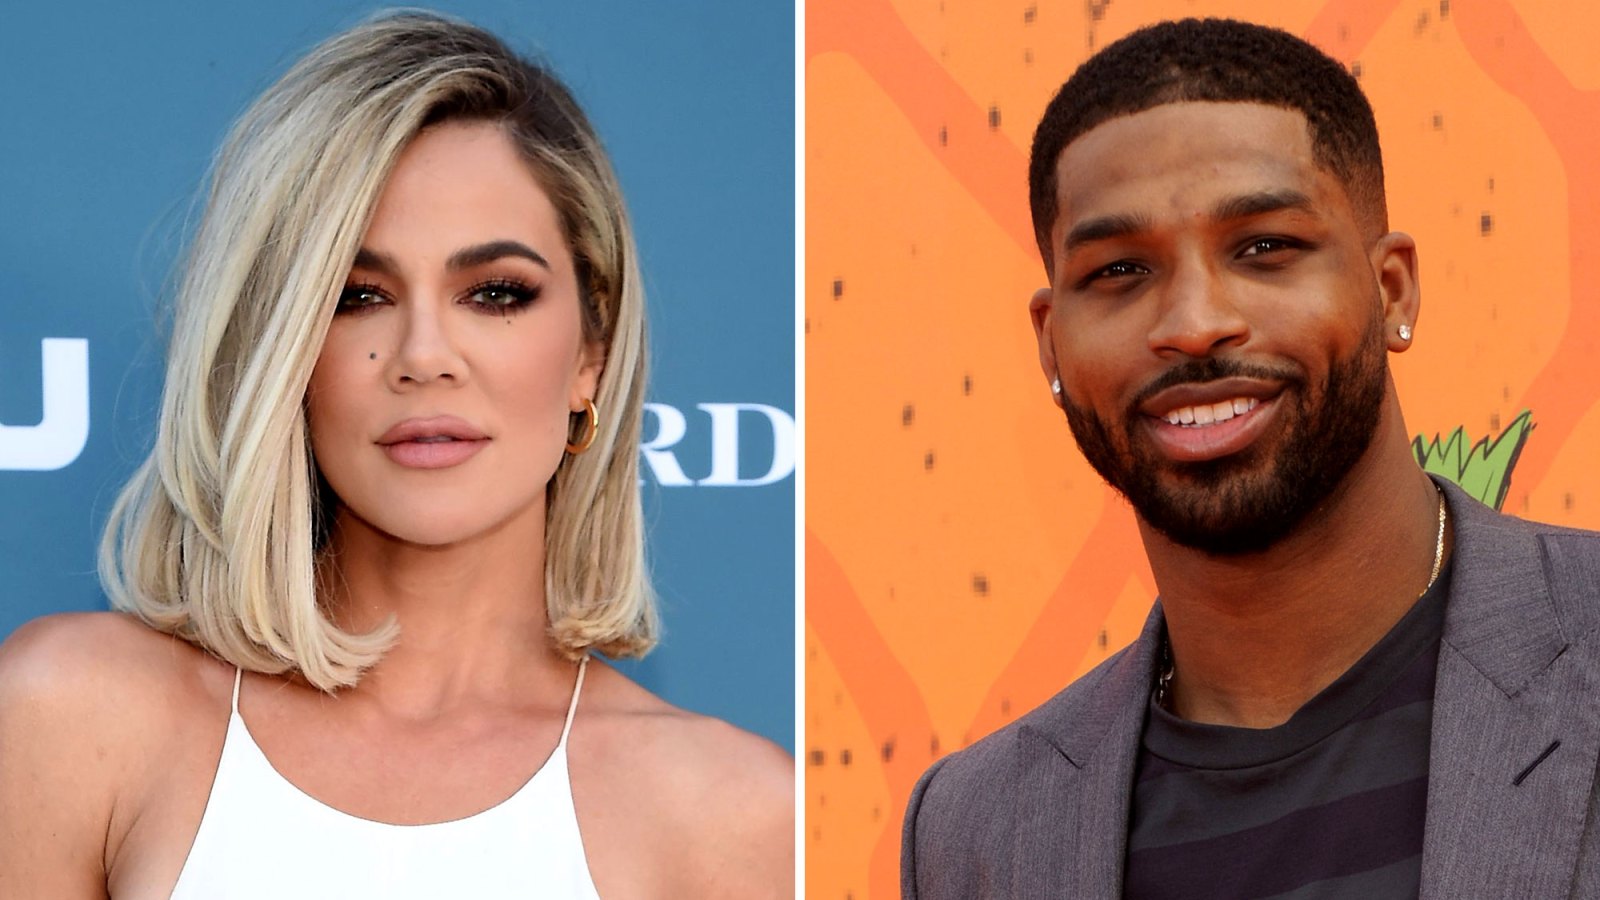 Over the Moon'! Inside Khloe Kardashian’s 1st Days With Her, Tristan's Son